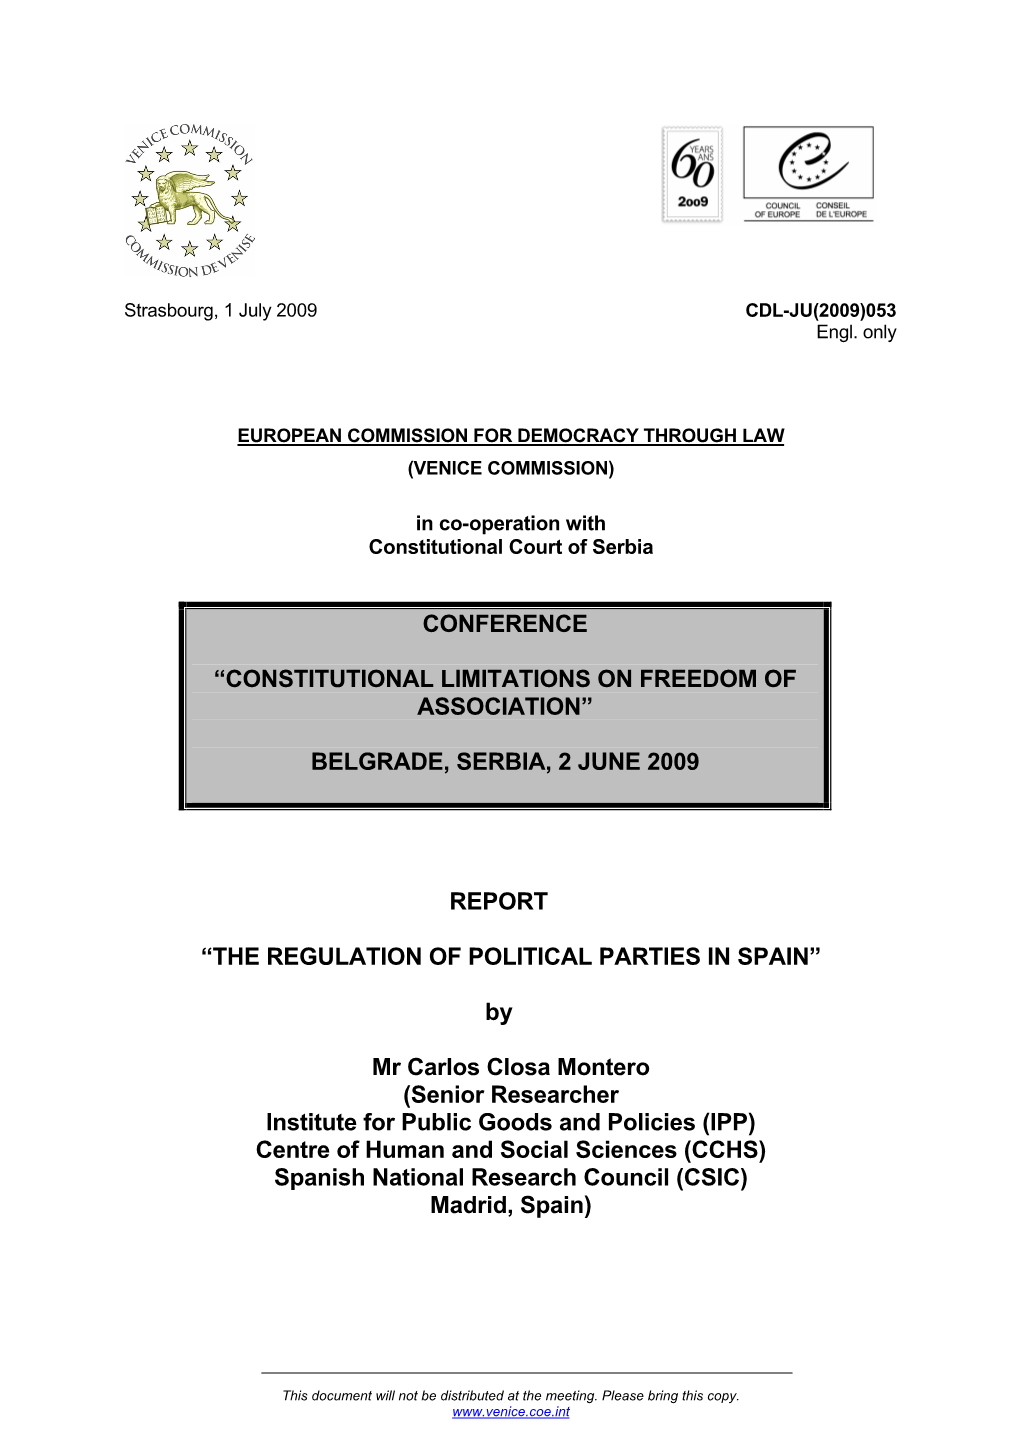 Conference “Constitutional Limitations on Freedom Of